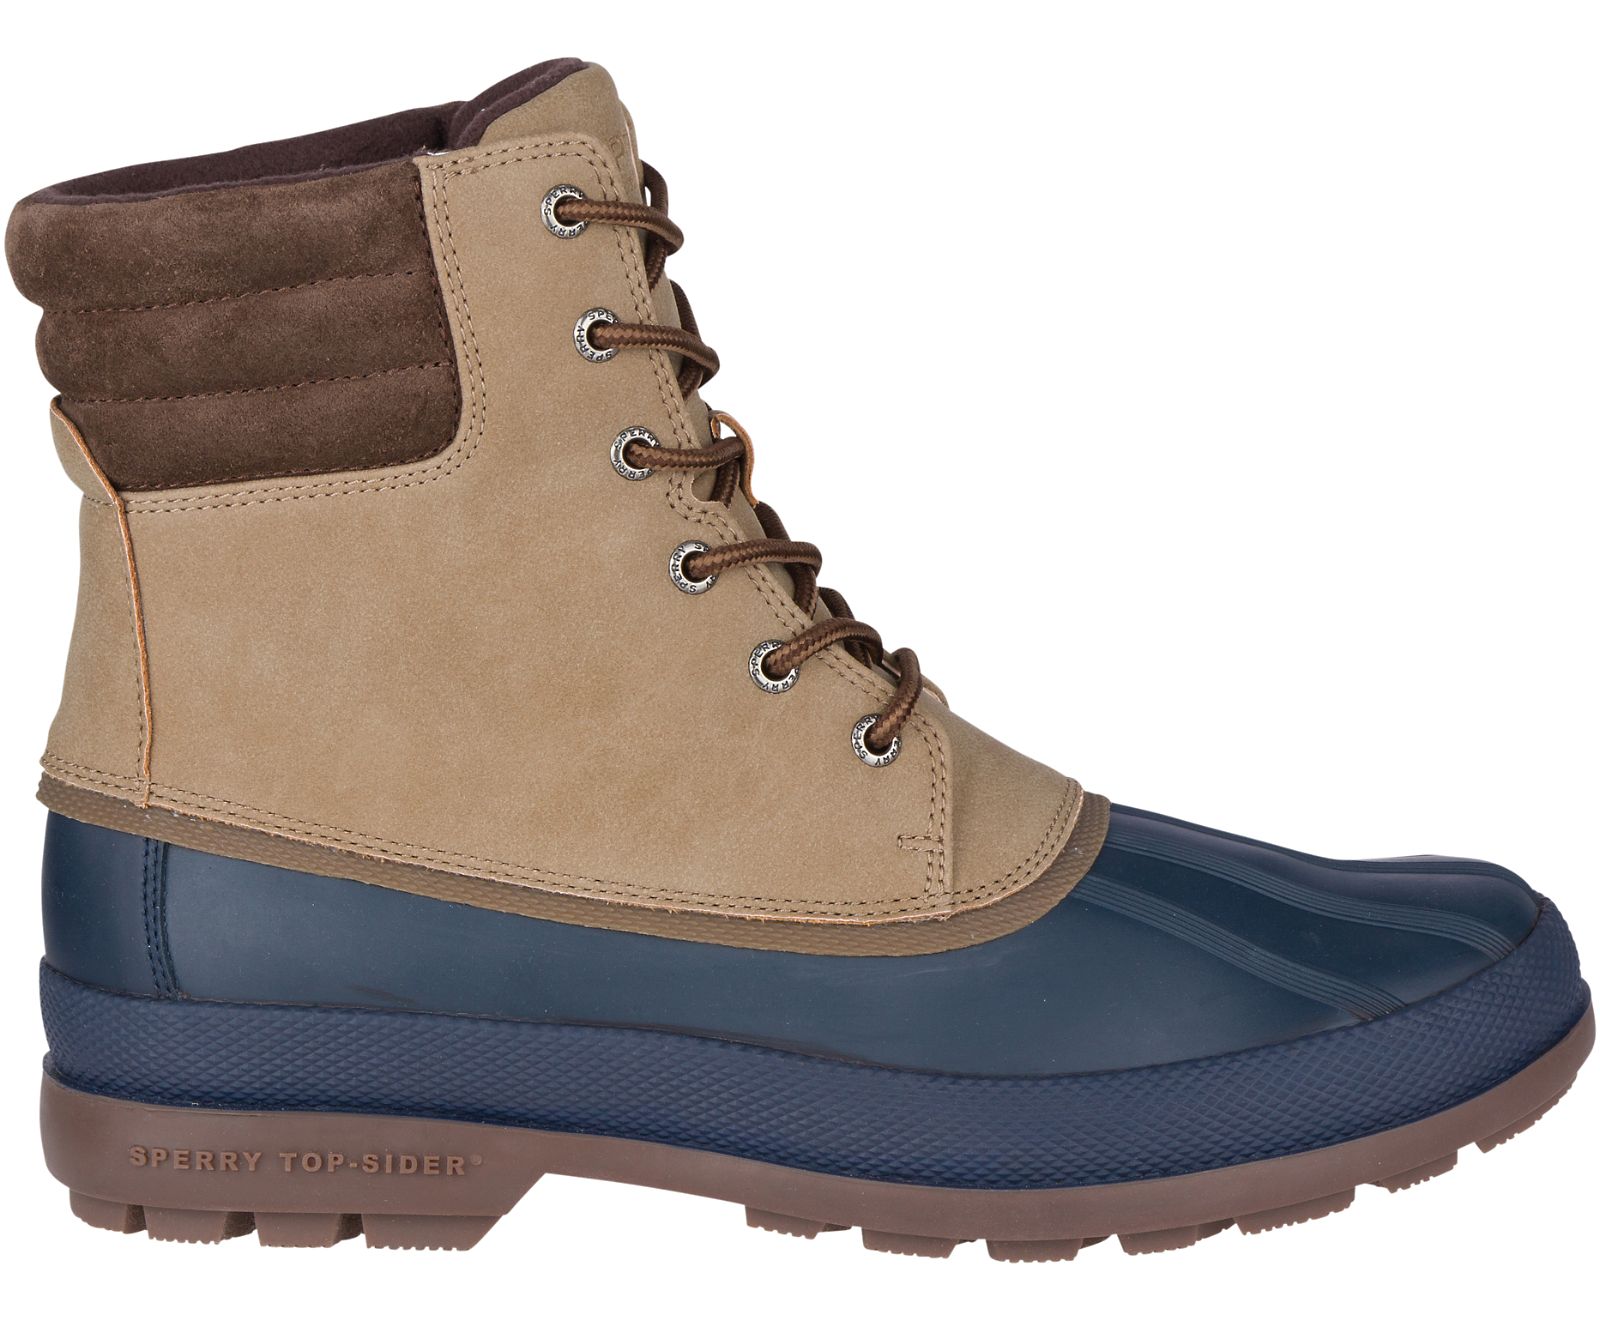 Men's Cold Bay Duck Boot - Taupe/Navy